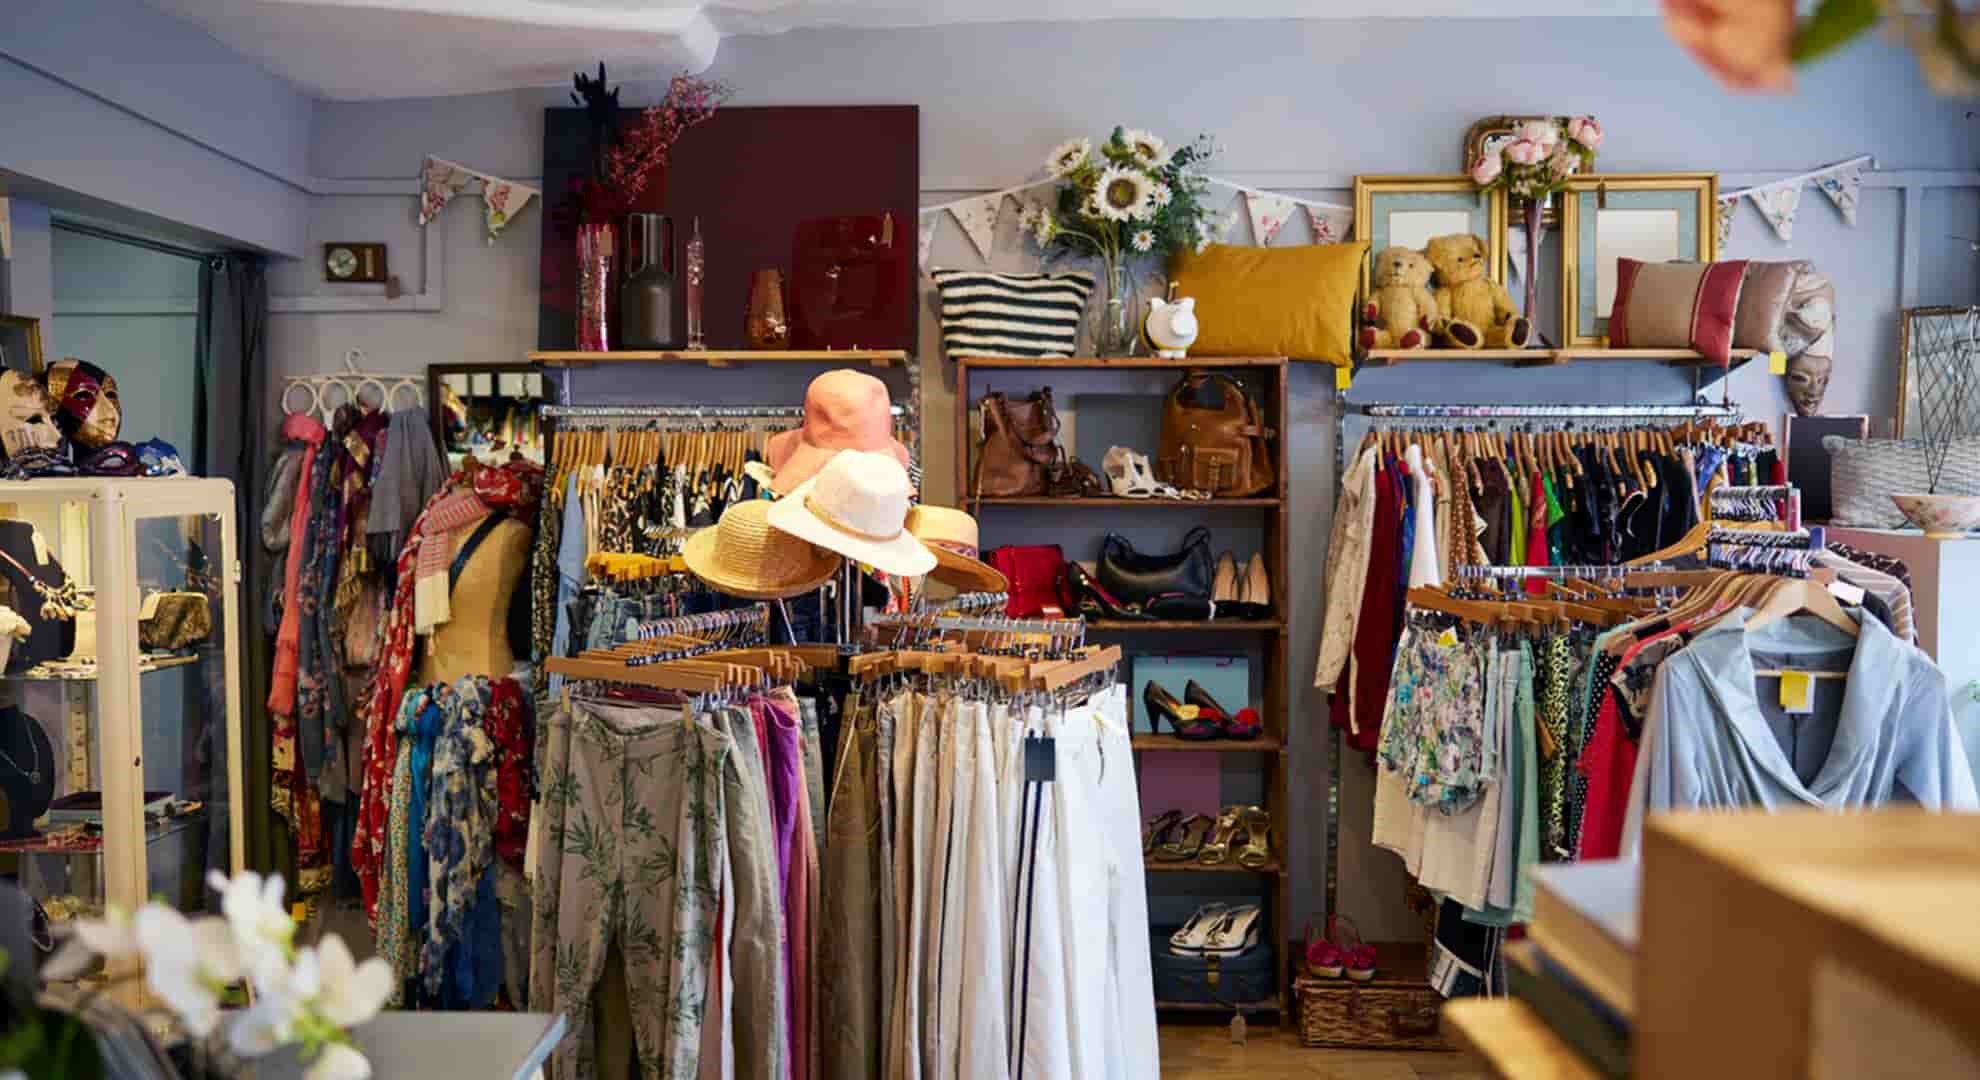 Interior Of Charity Shop Or Thrift Store Selling Used And Sustainable Clothing And Household Goods  